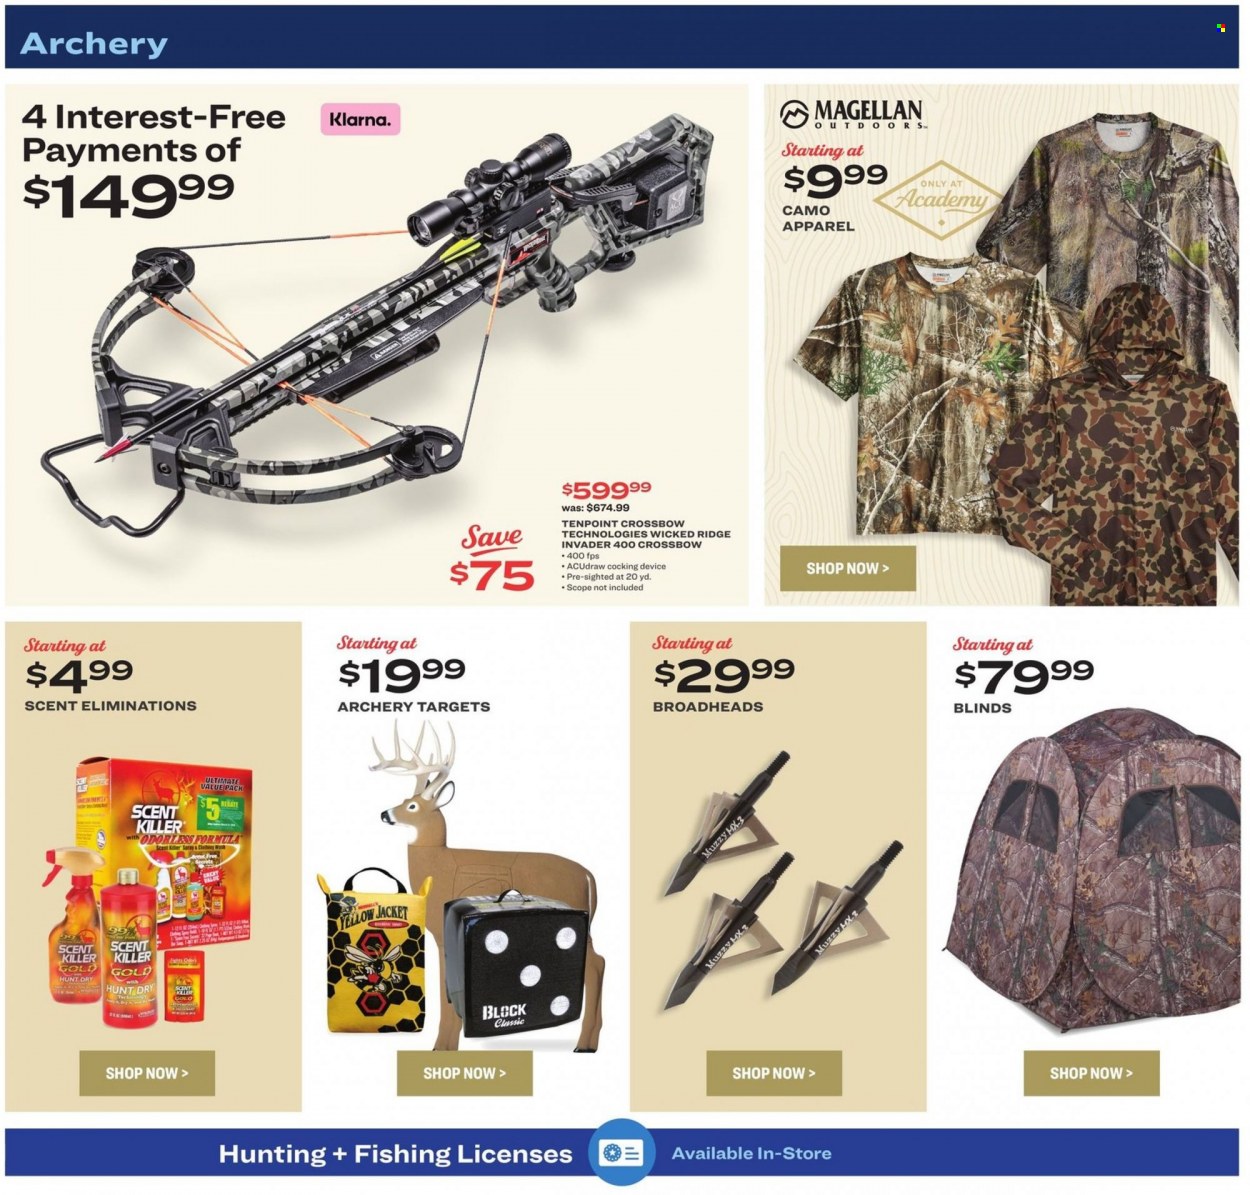 Academy Sports + Outdoors ad  - 09.12.2022 - 10.02.2022.